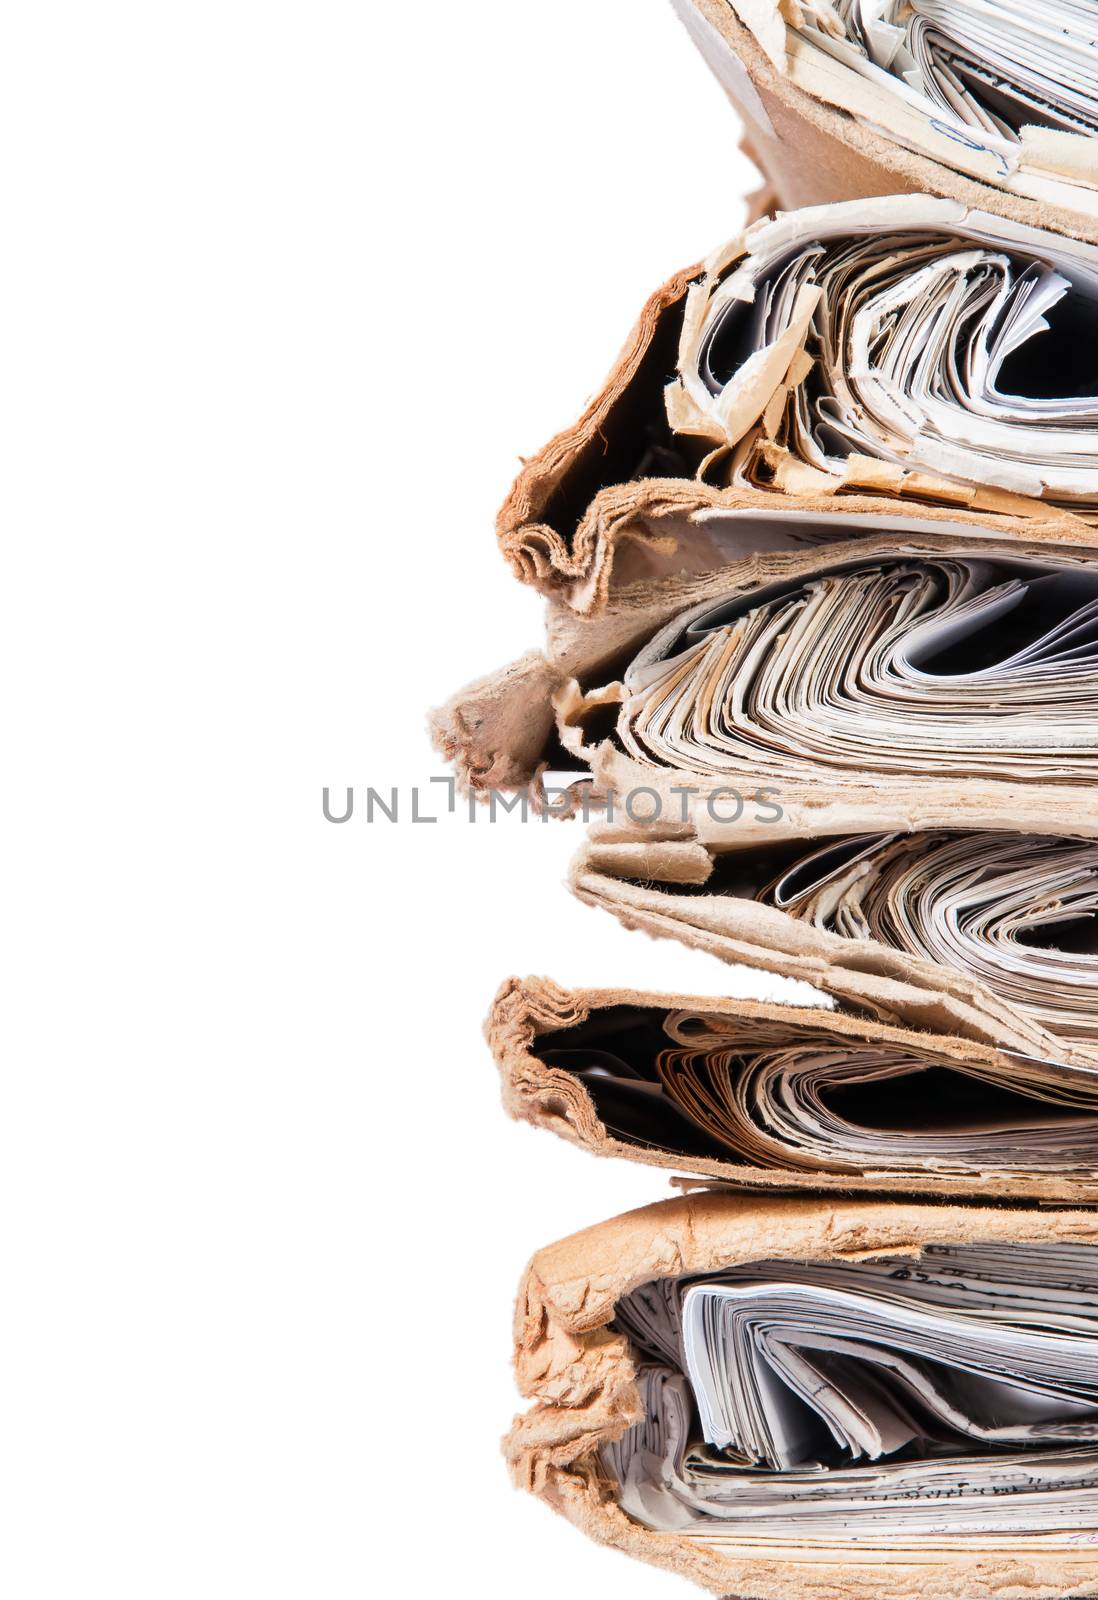 Old Covers Files Arranged In Chaotic Stack Isolated On White Background